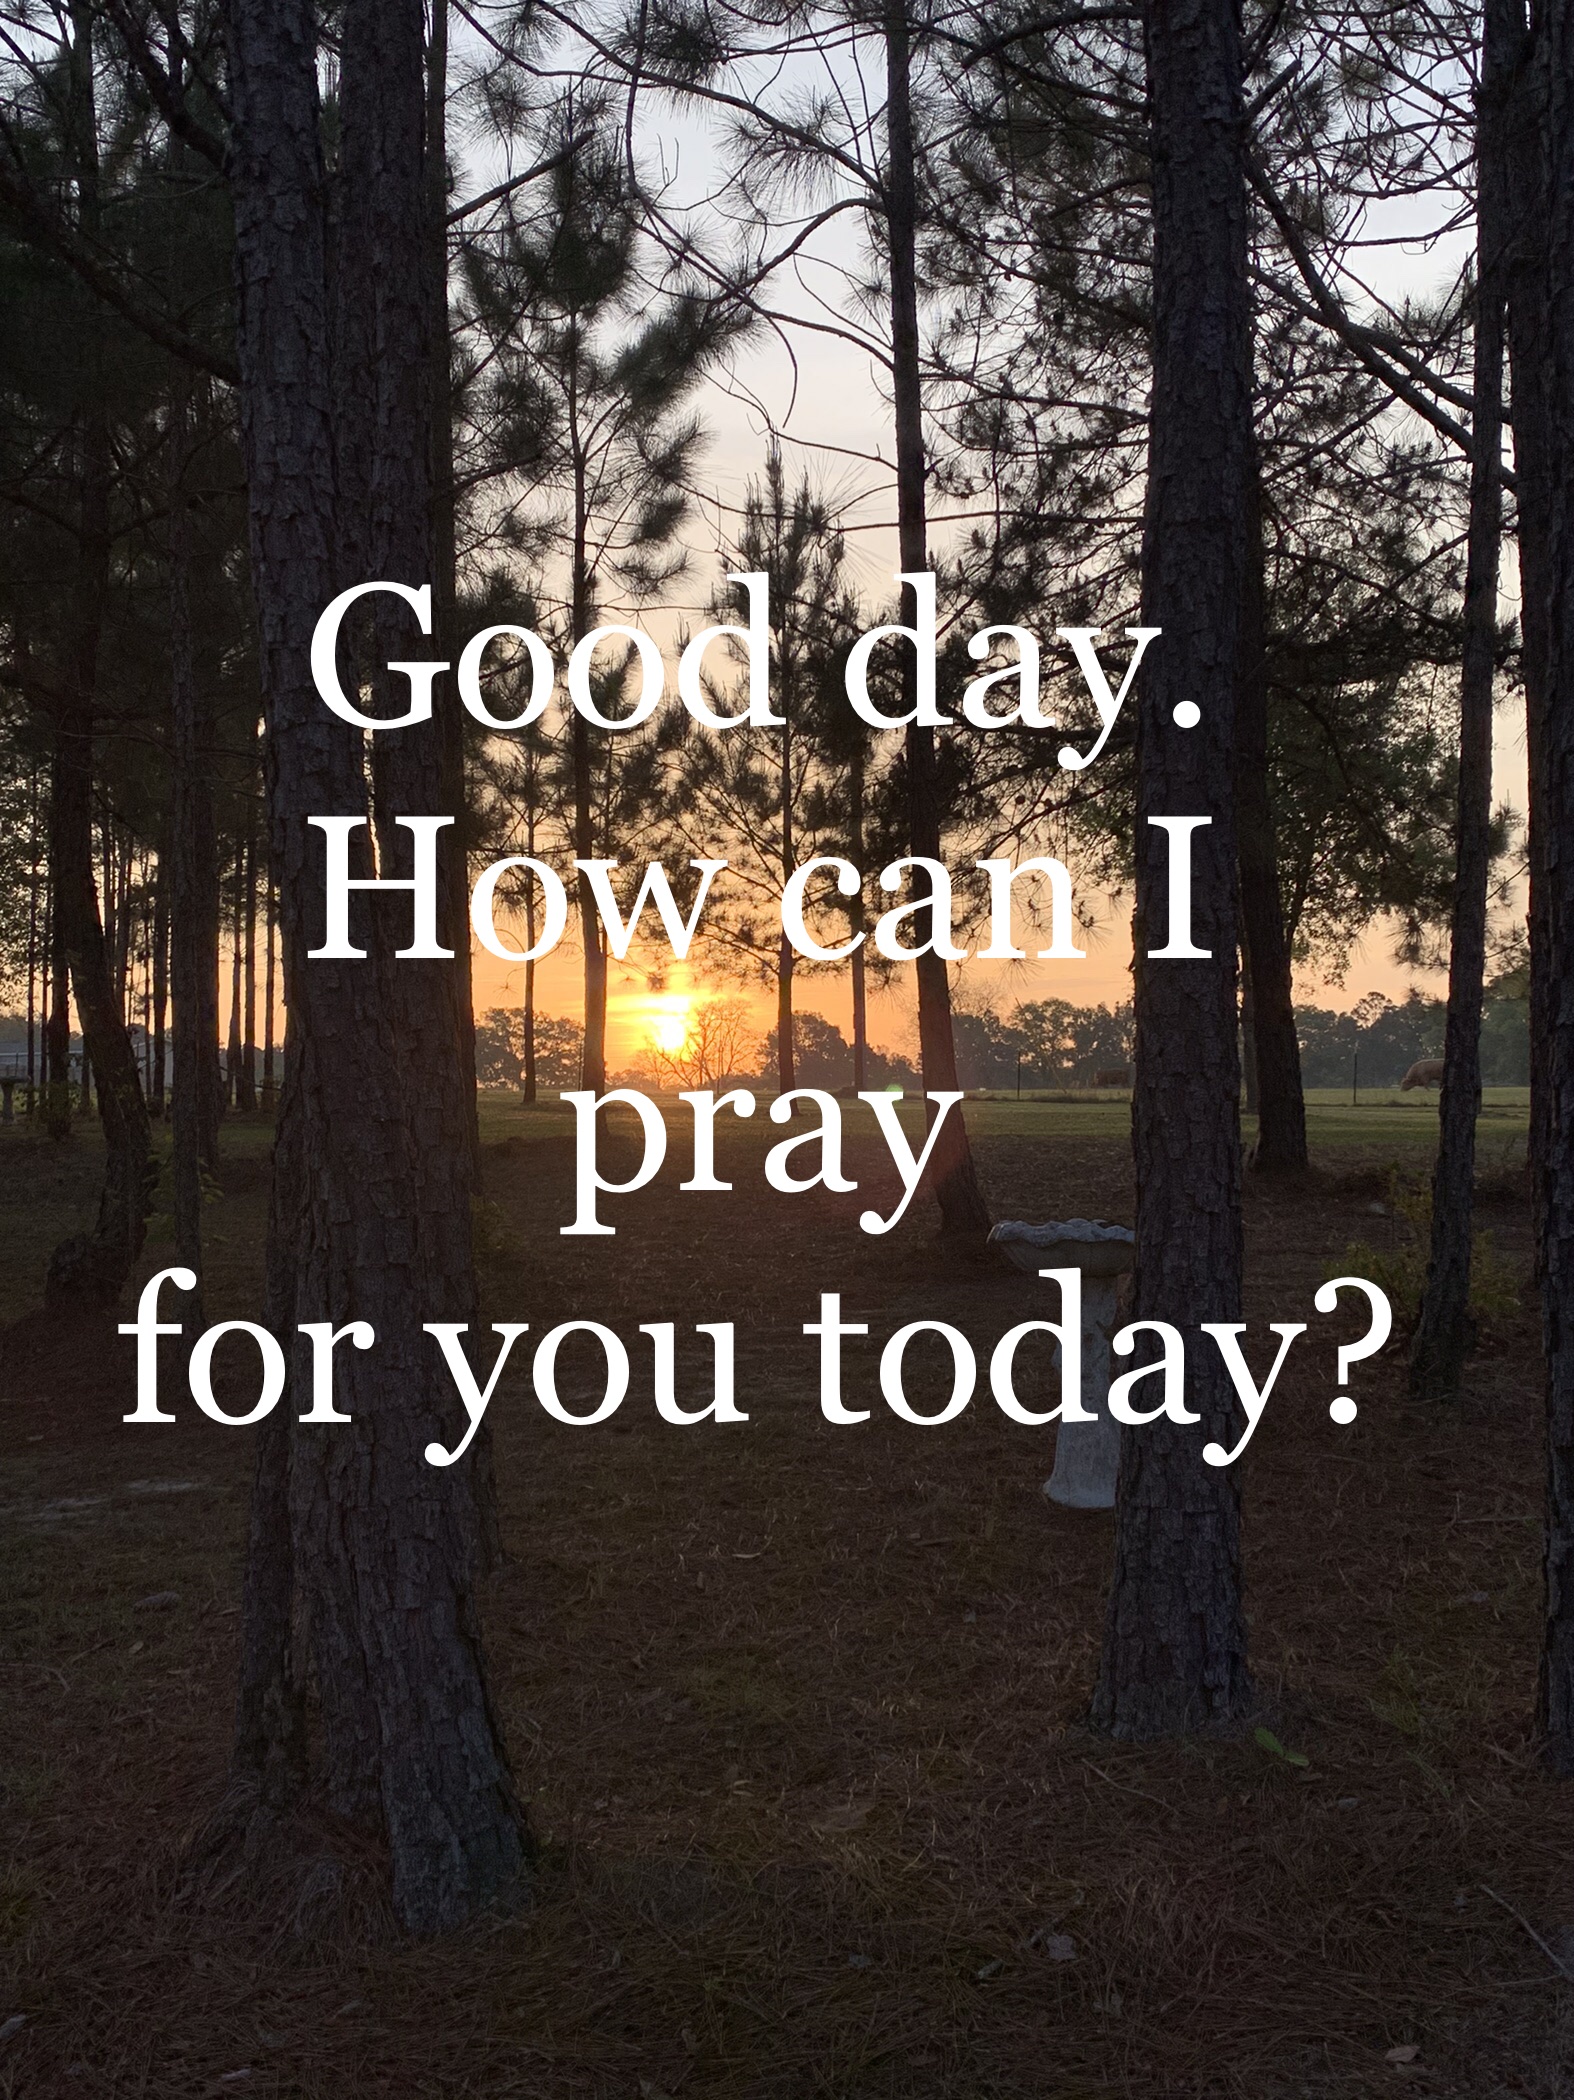 Are you in need of prayer?